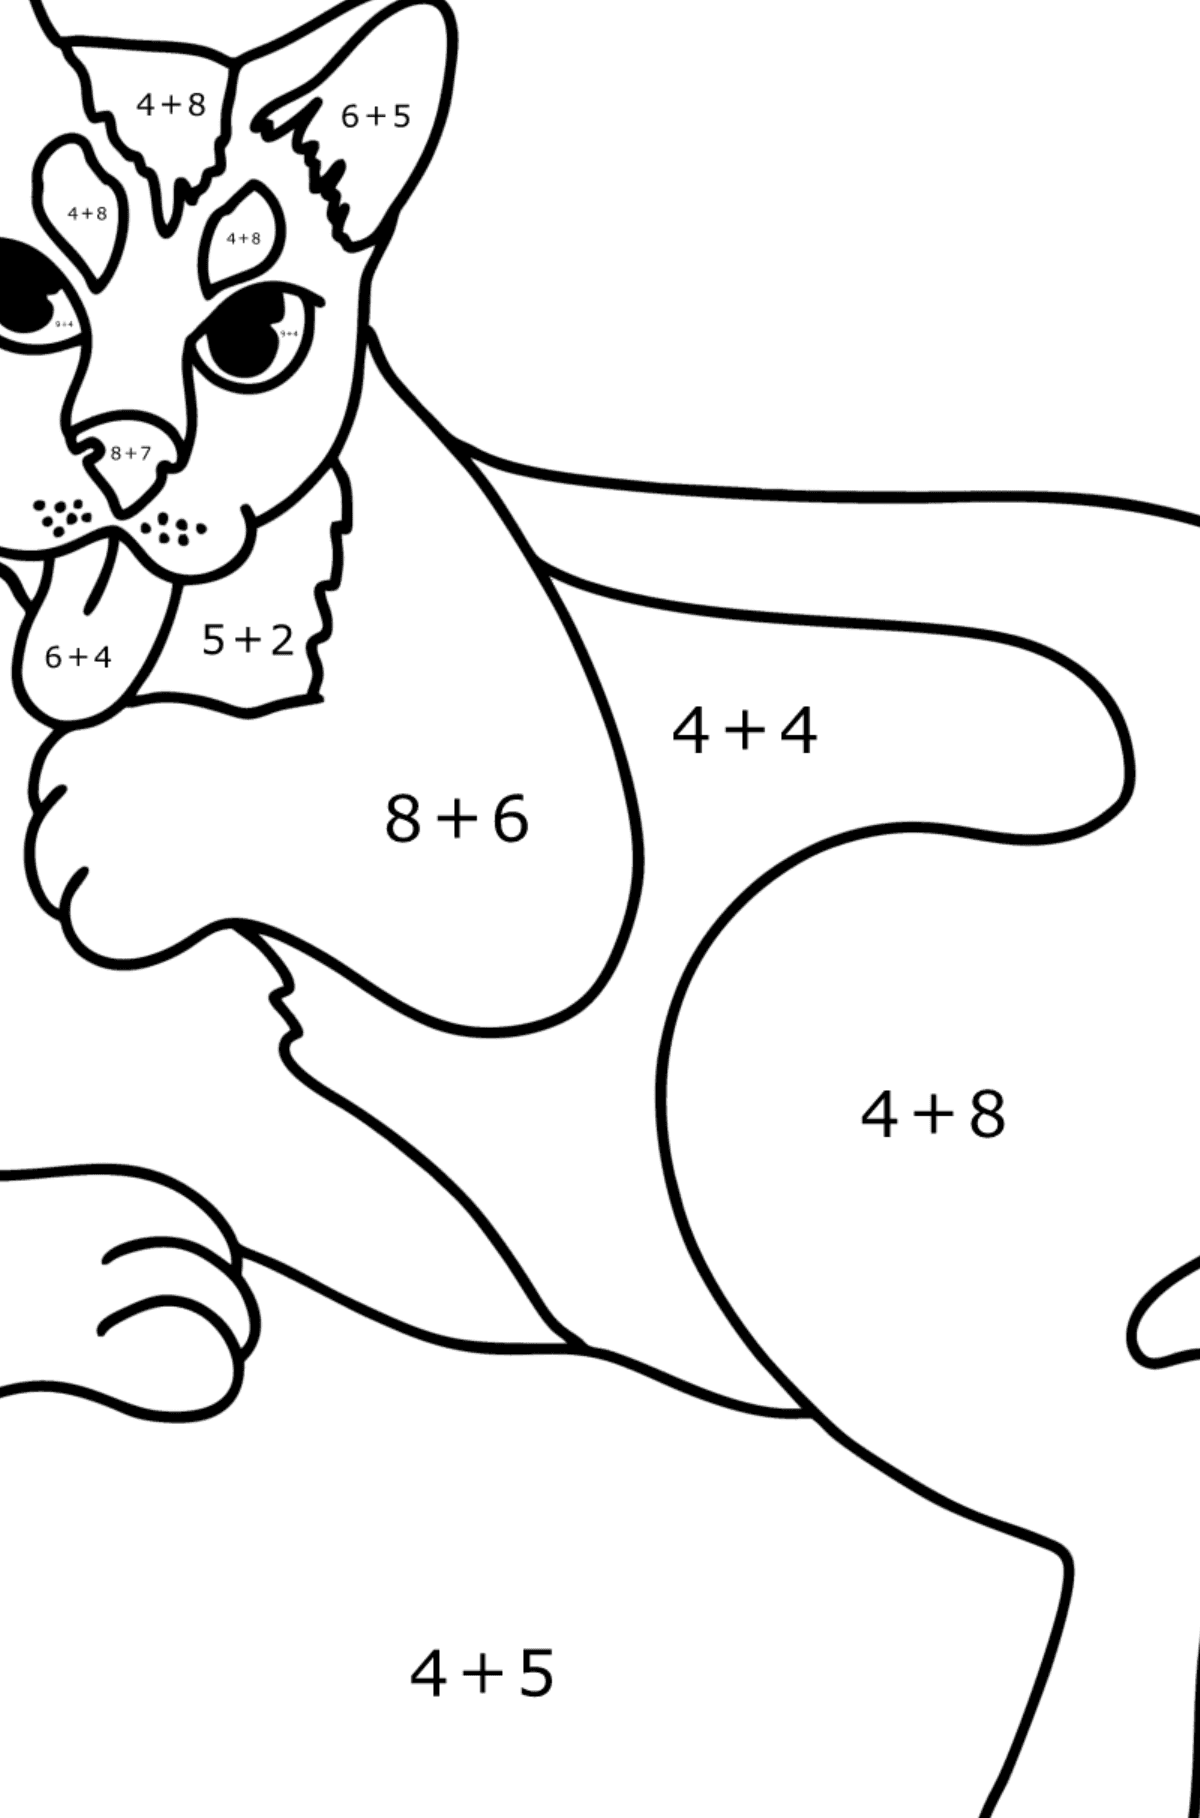 Black Cat coloring page - Math Coloring - Addition for Kids